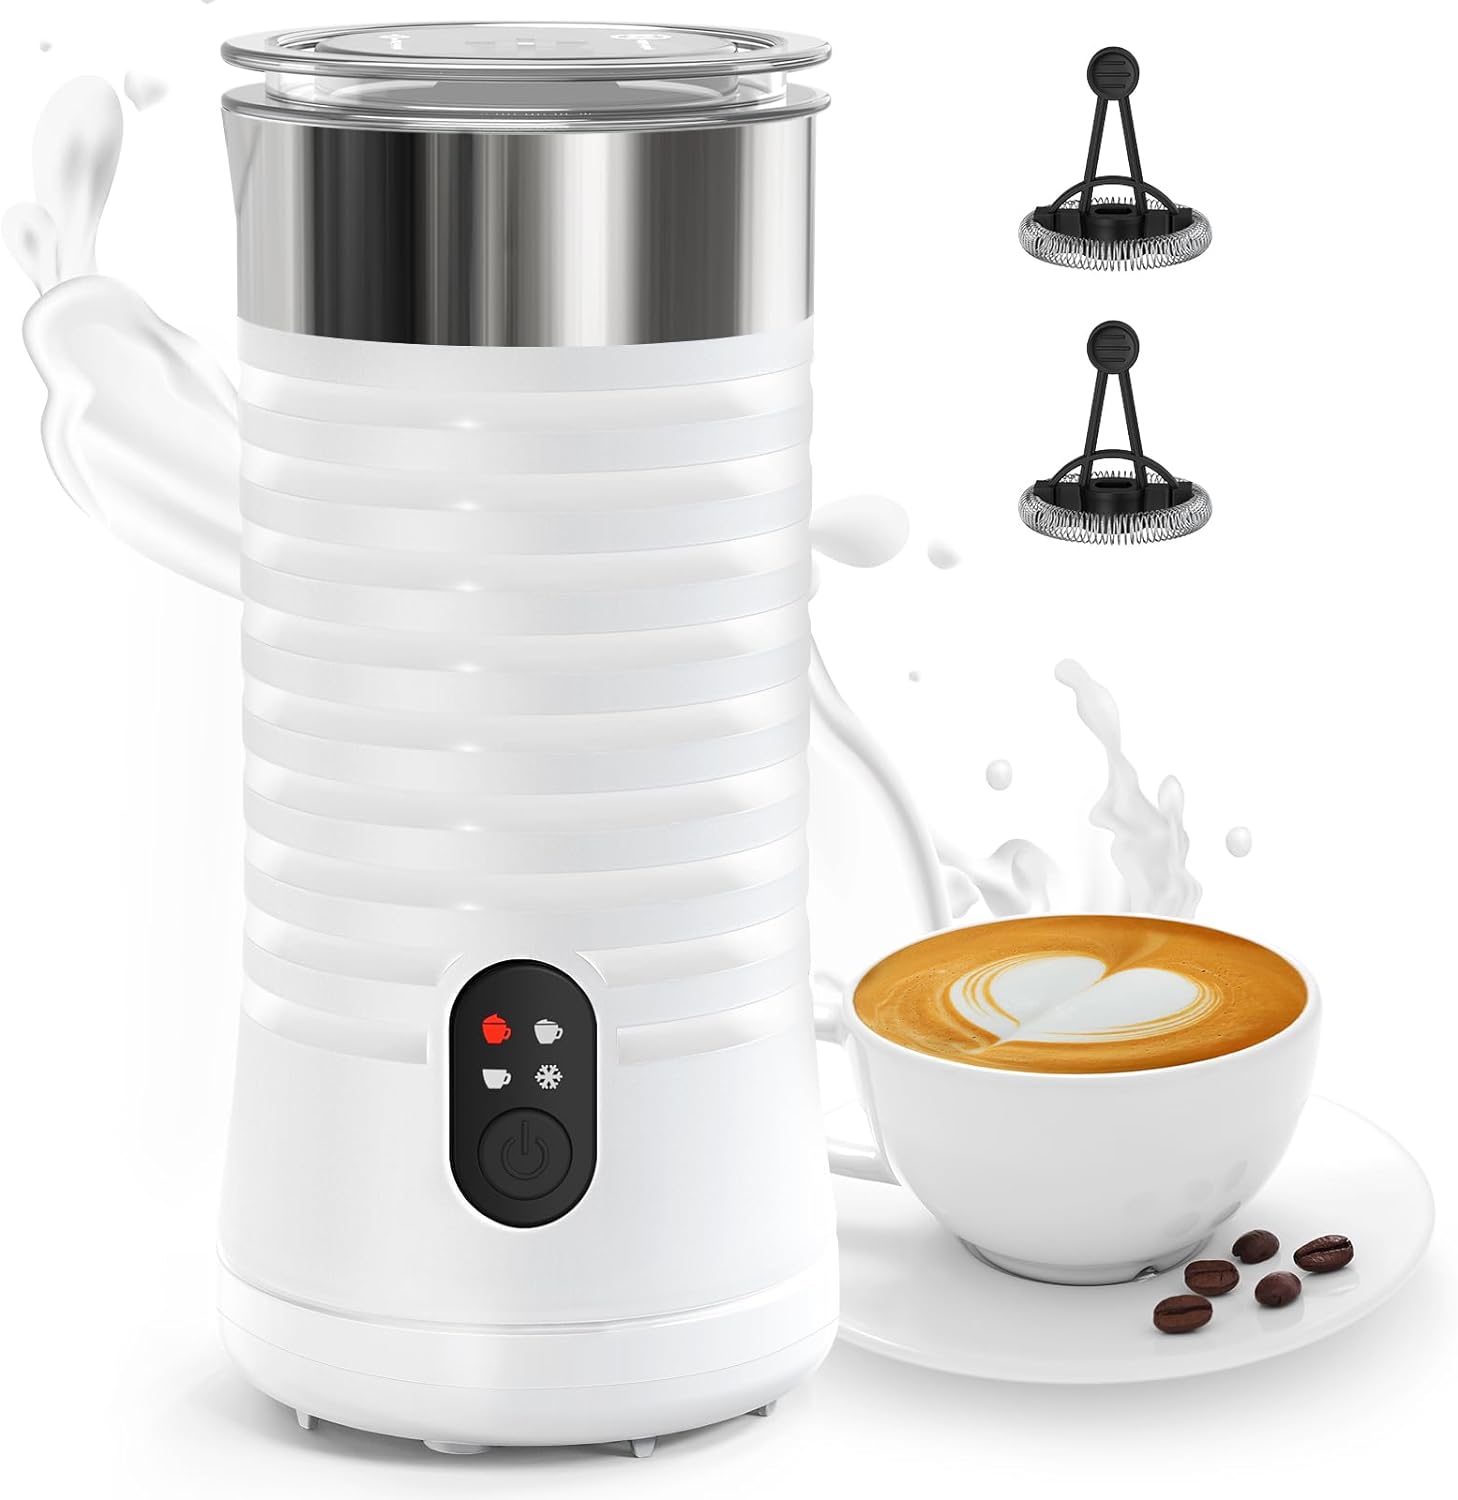 Electric Milk Steamer Review